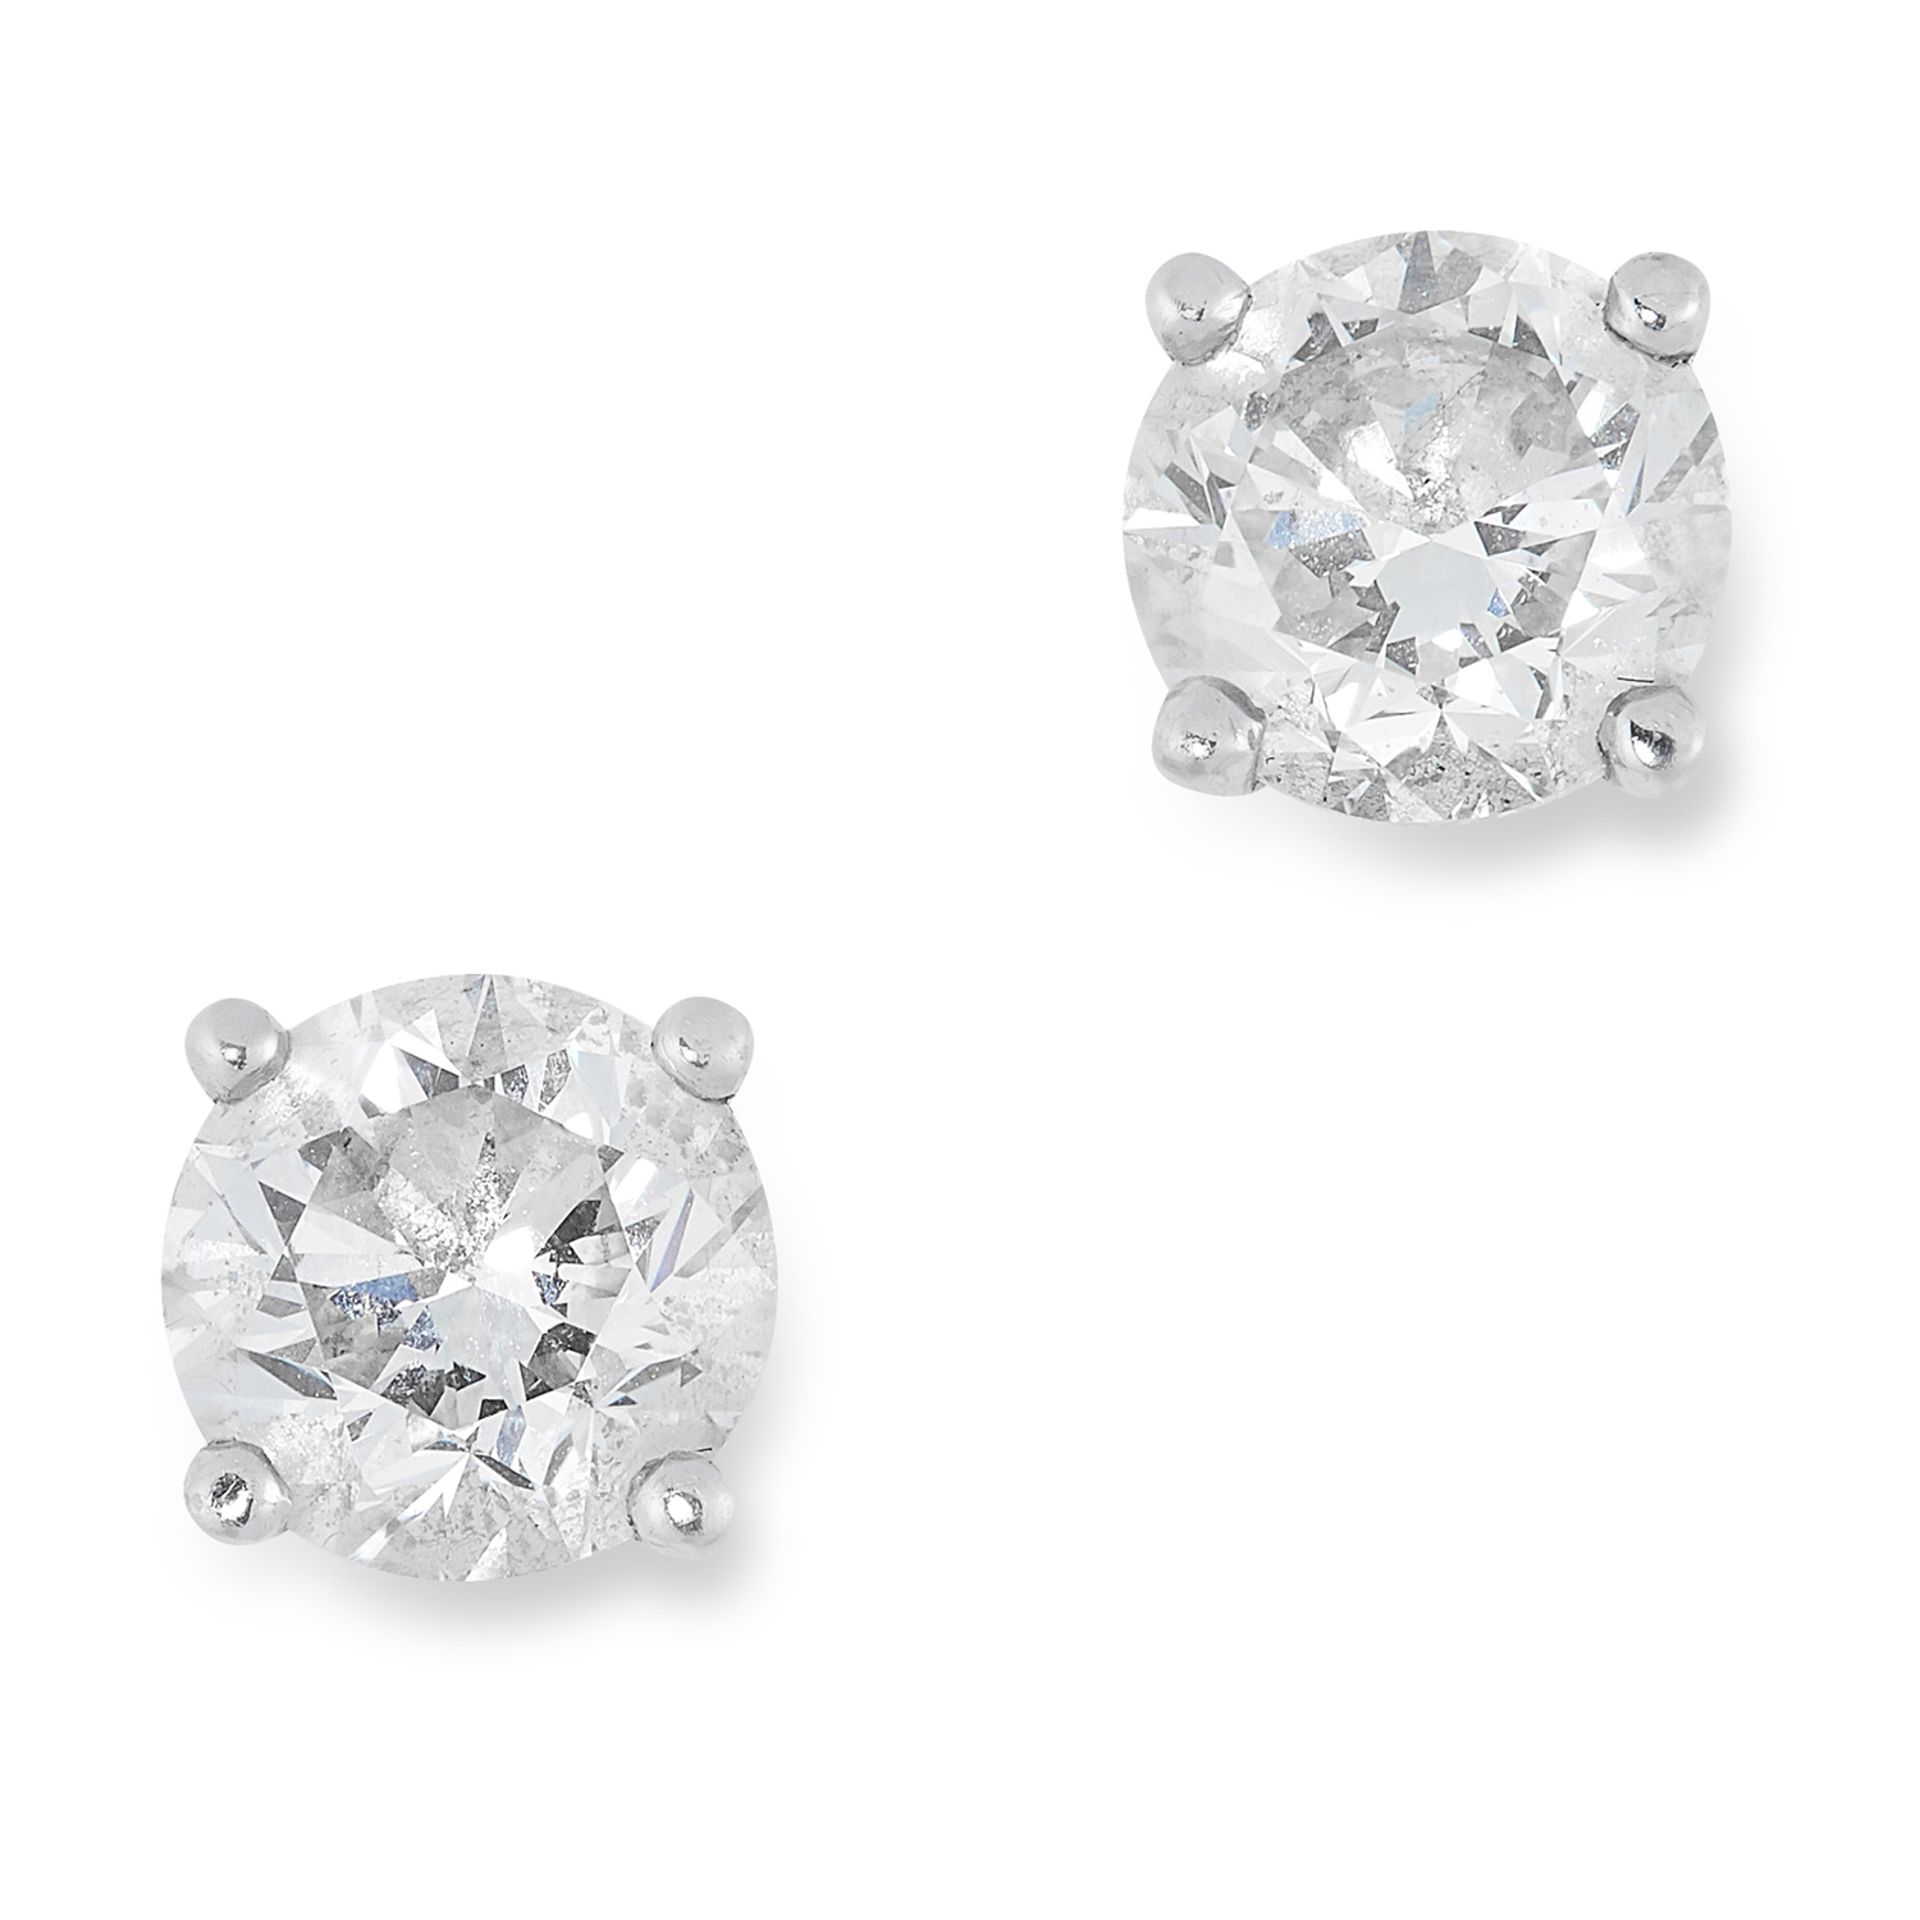 A PAIR OF 2.02 CARAT DIAMOND STUD EARRINGS each set with a round cut diamond of 1.01 carats, 0.